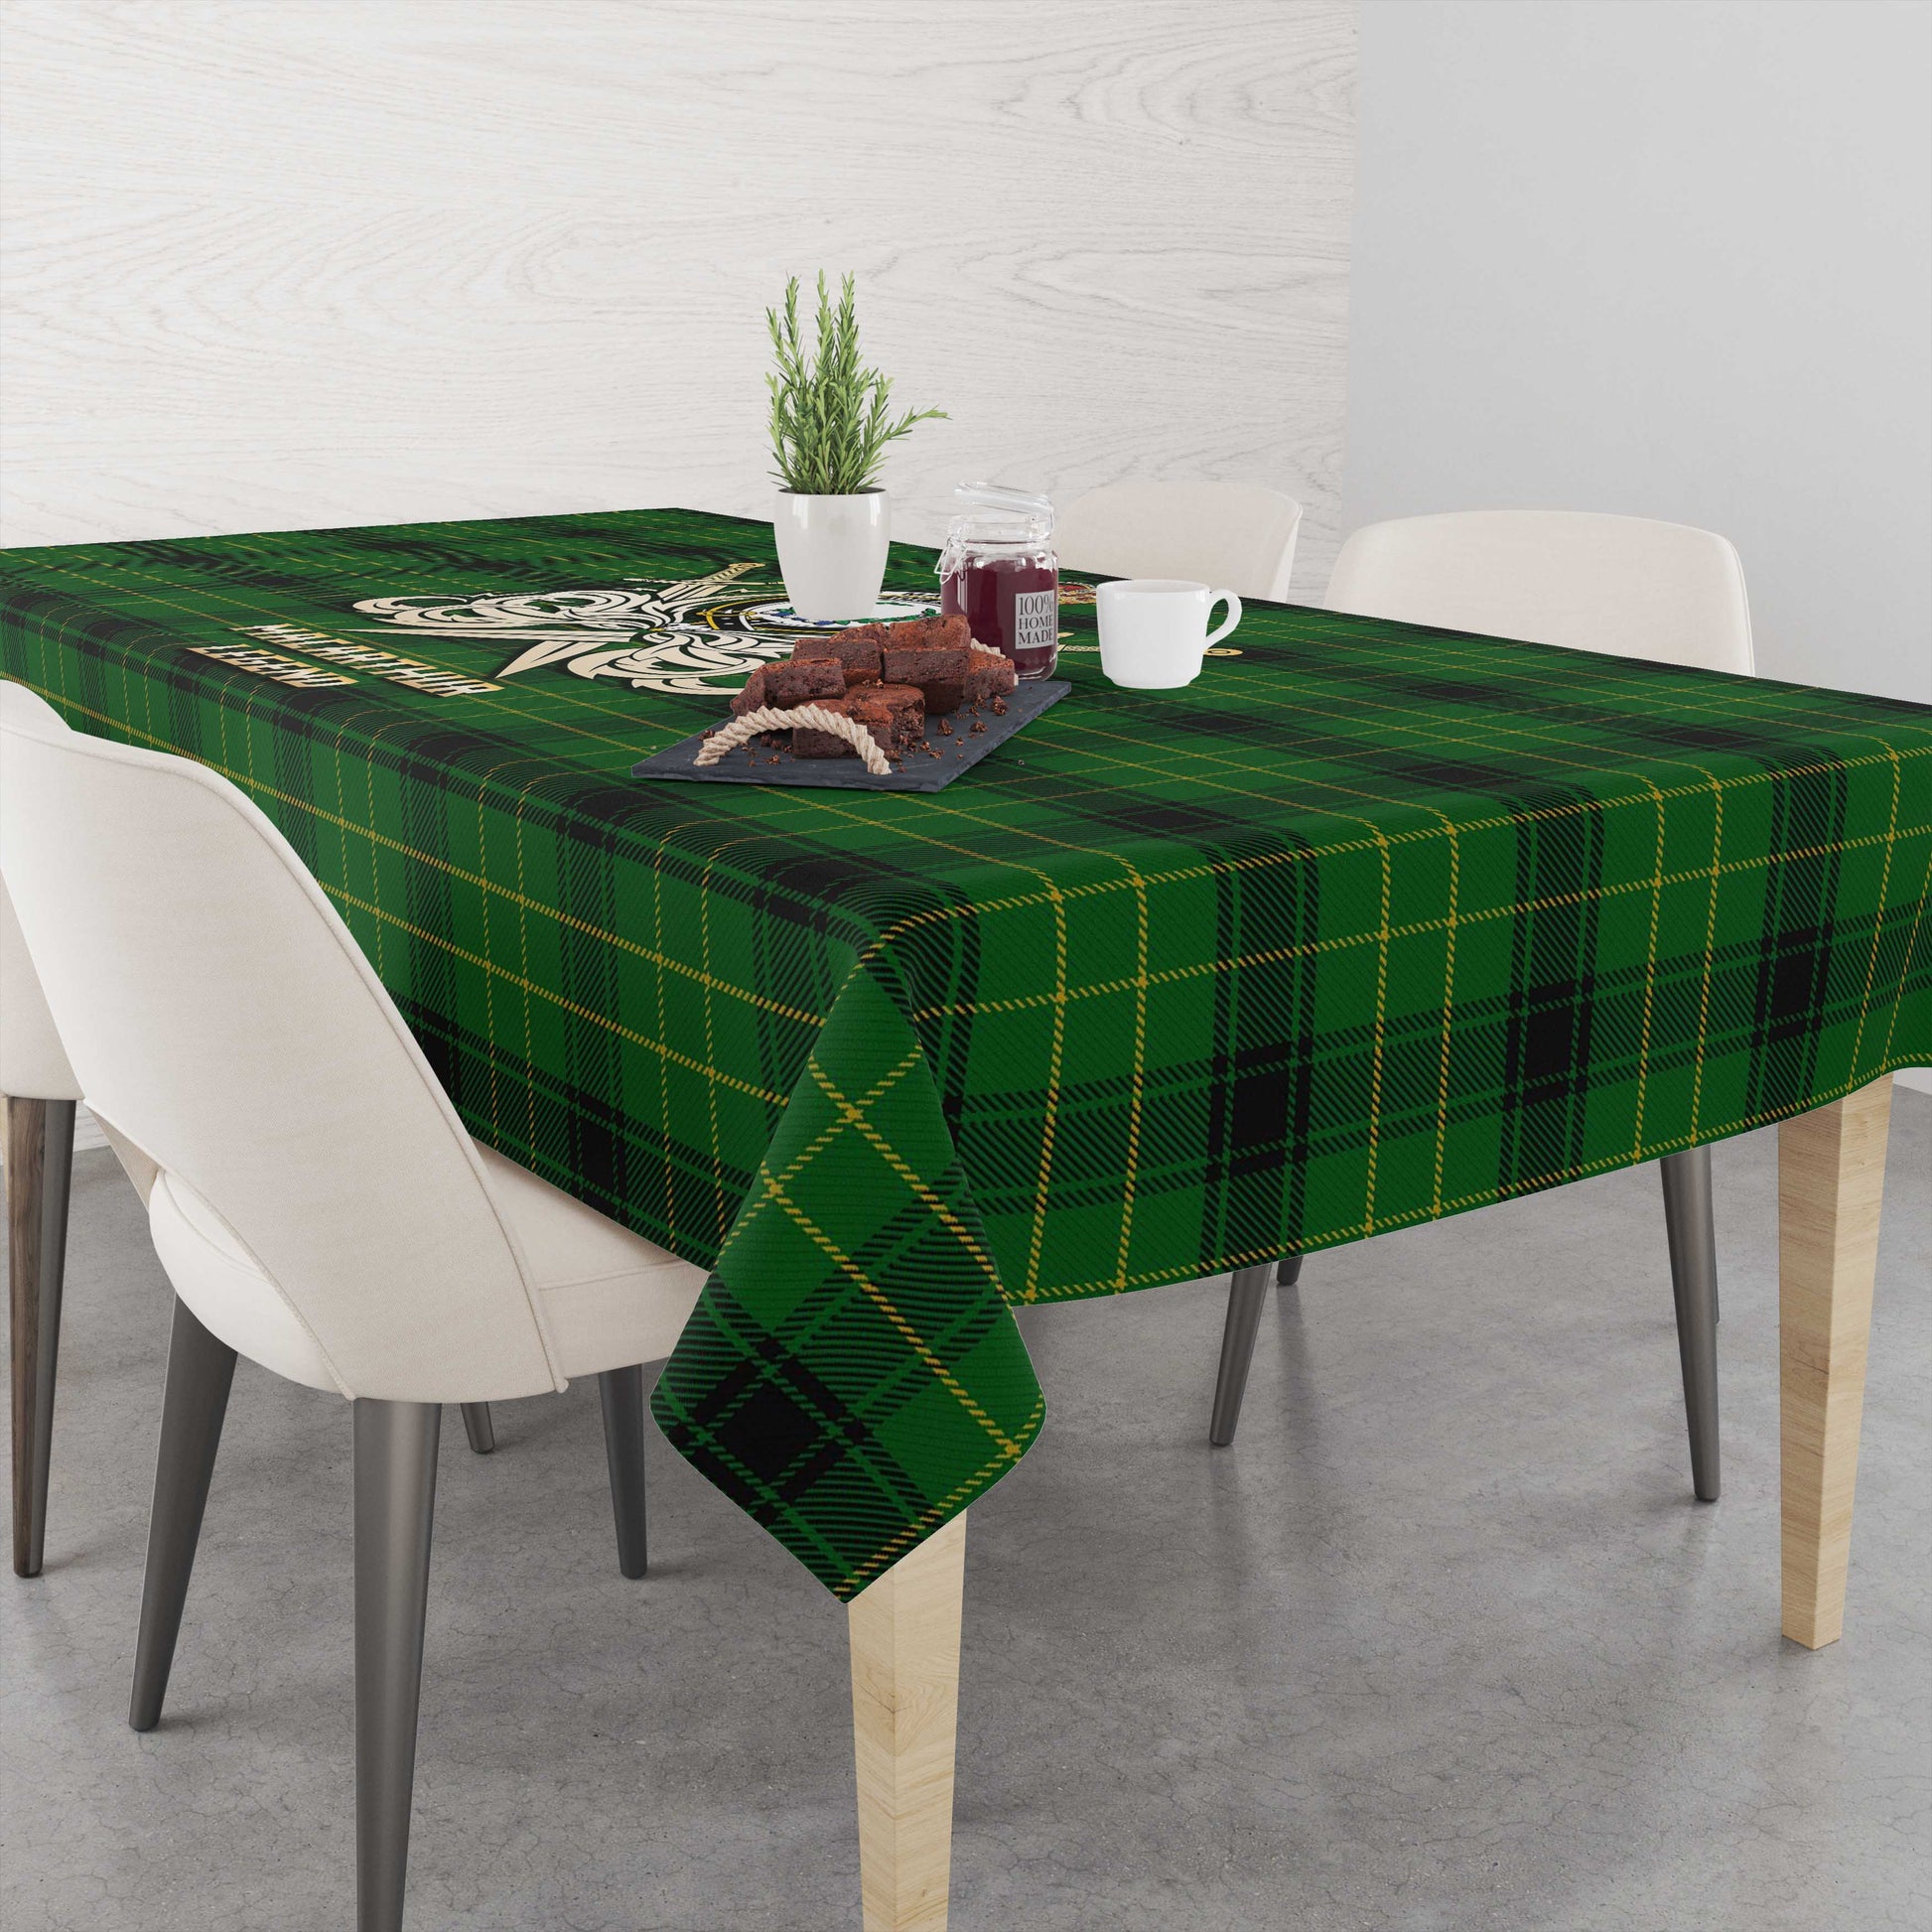 Tartan Vibes Clothing MacArthur Highland Tartan Tablecloth with Clan Crest and the Golden Sword of Courageous Legacy